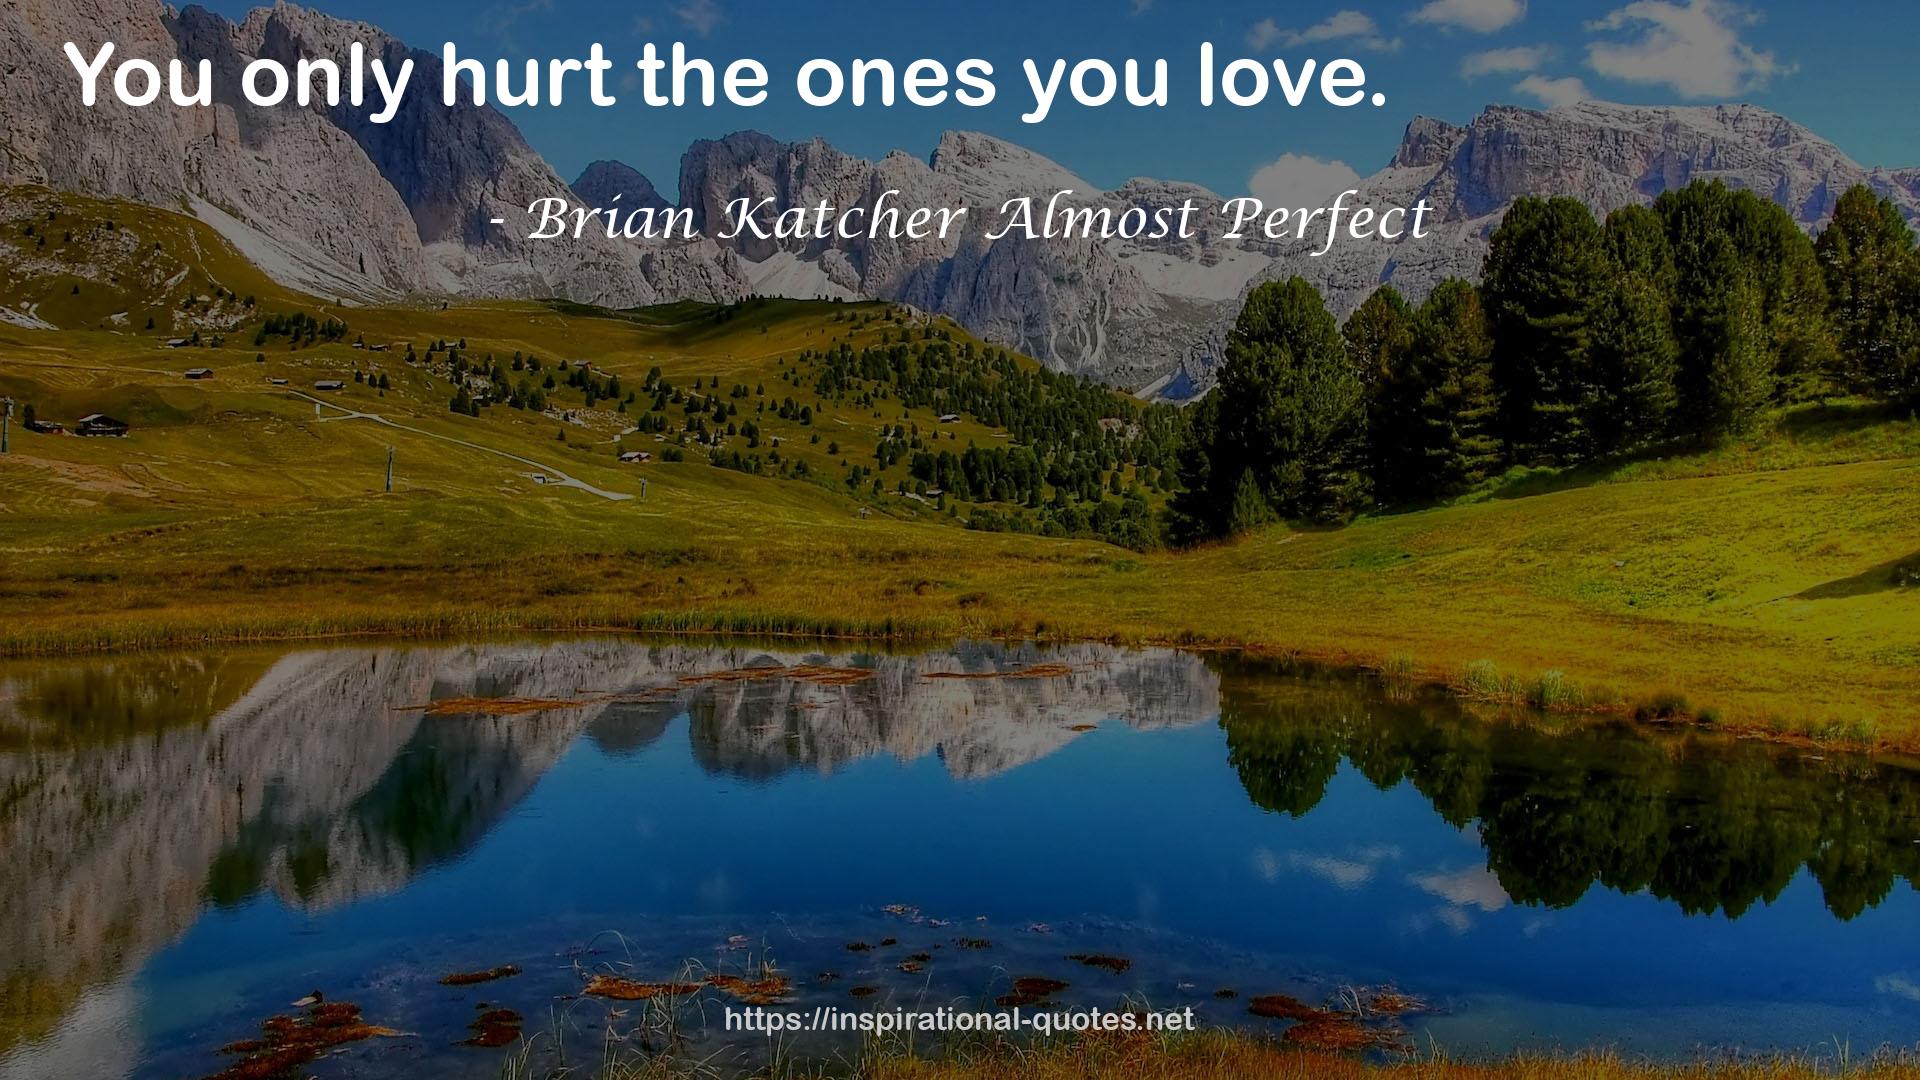 Brian Katcher Almost Perfect QUOTES